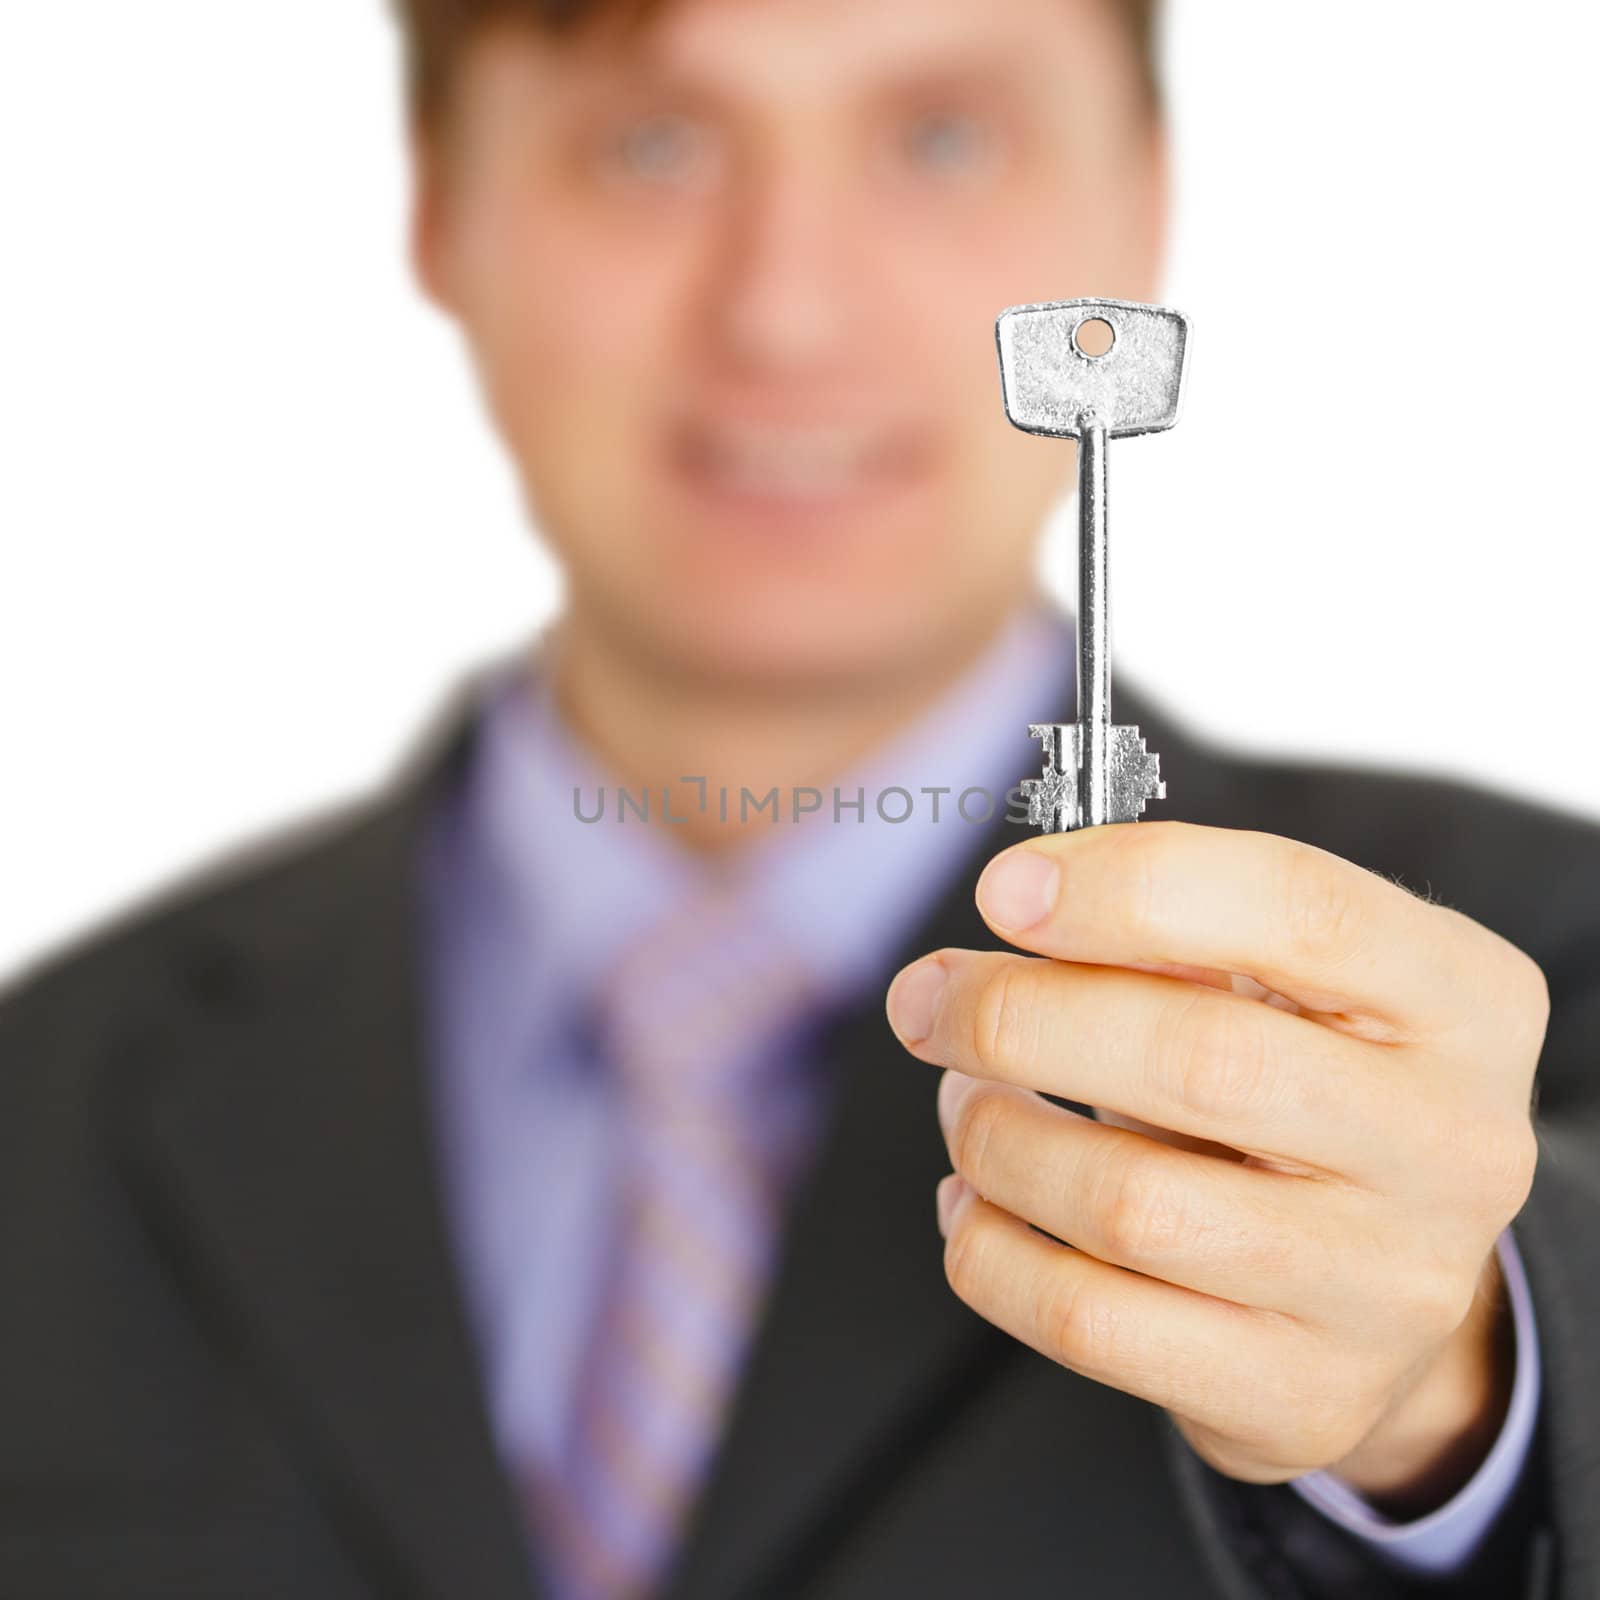 The official gives us the key to a new house